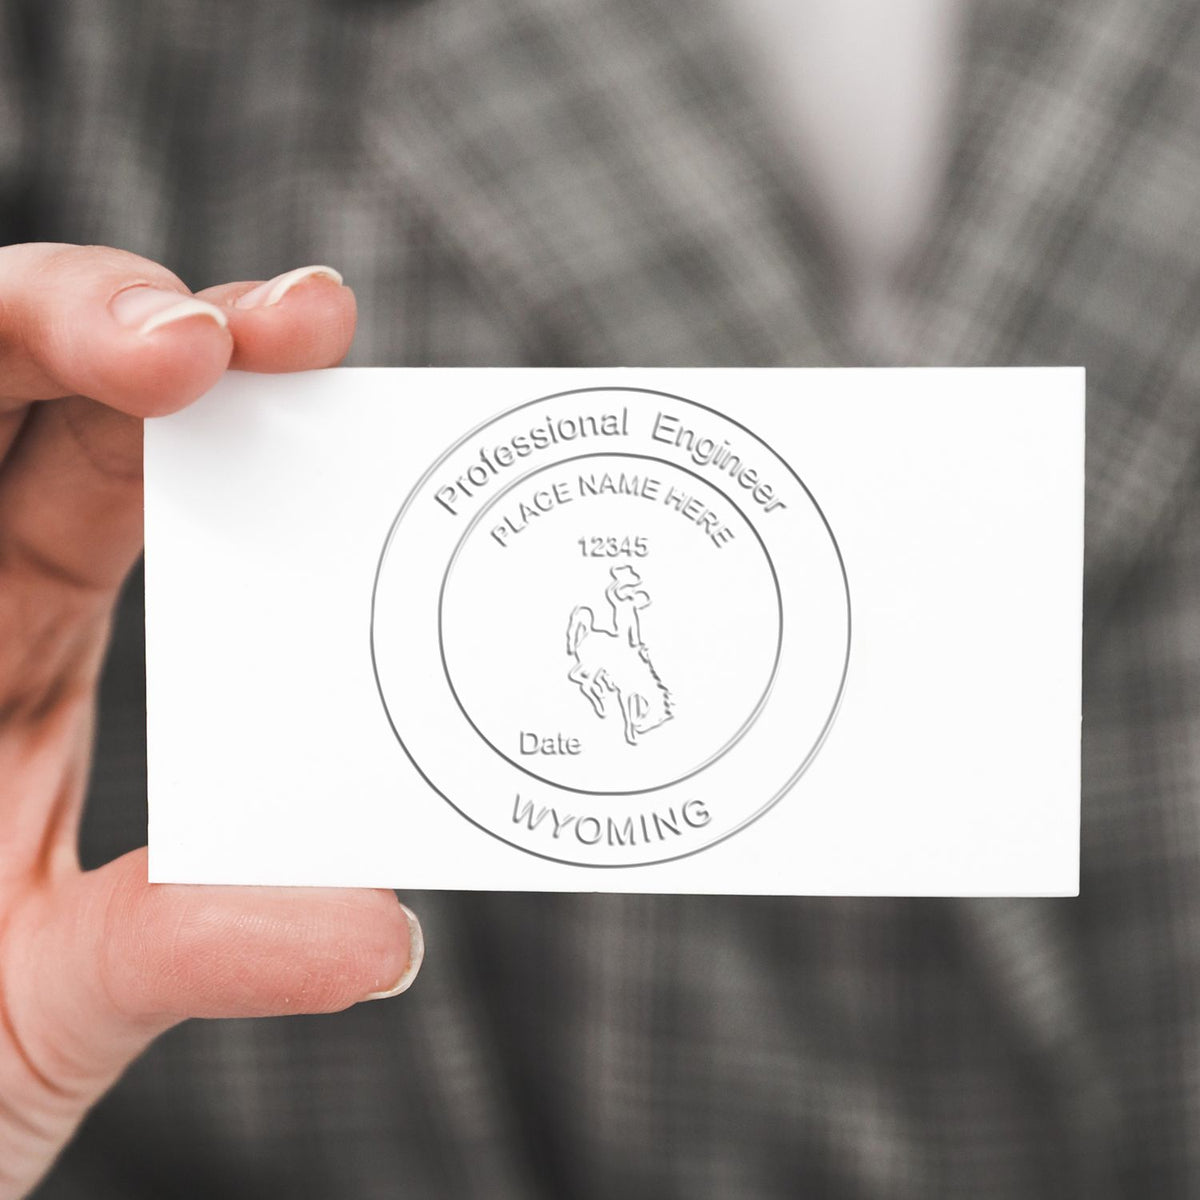 An alternative view of the Hybrid Wyoming Engineer Seal stamped on a sheet of paper showing the image in use